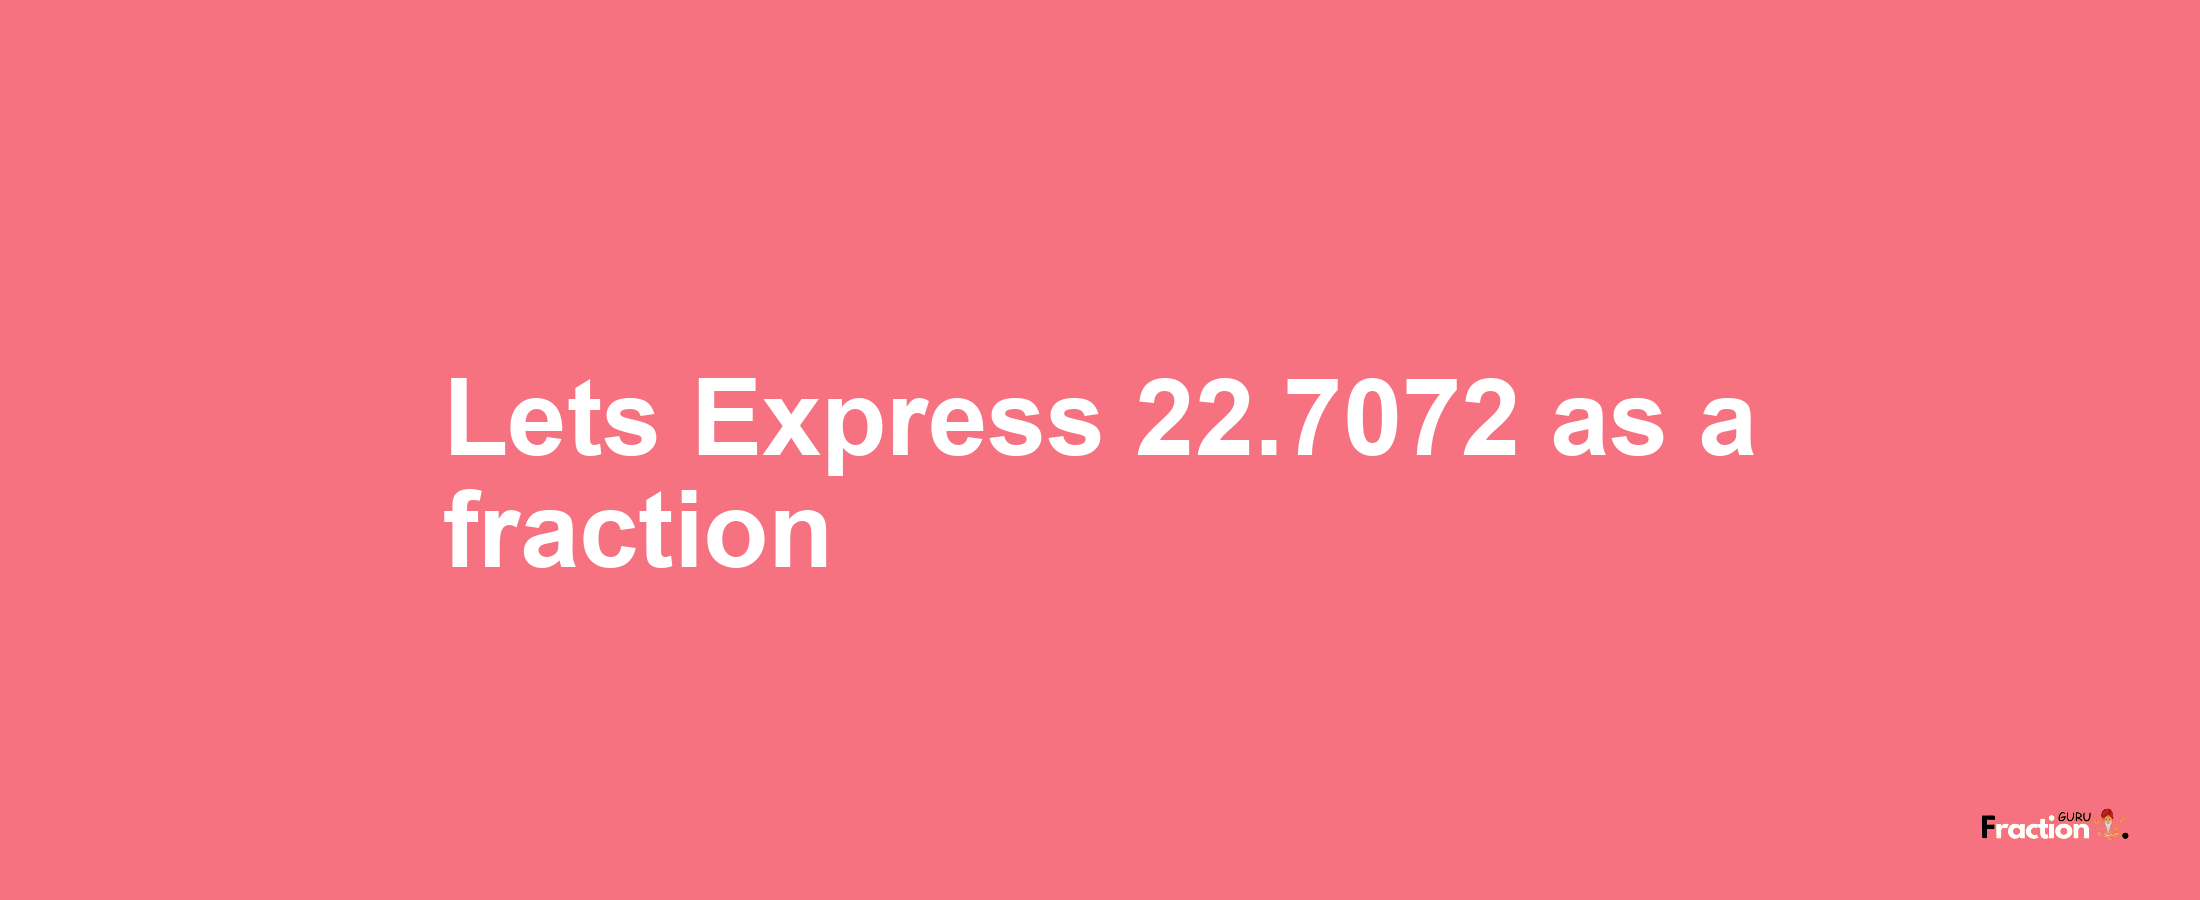 Lets Express 22.7072 as afraction